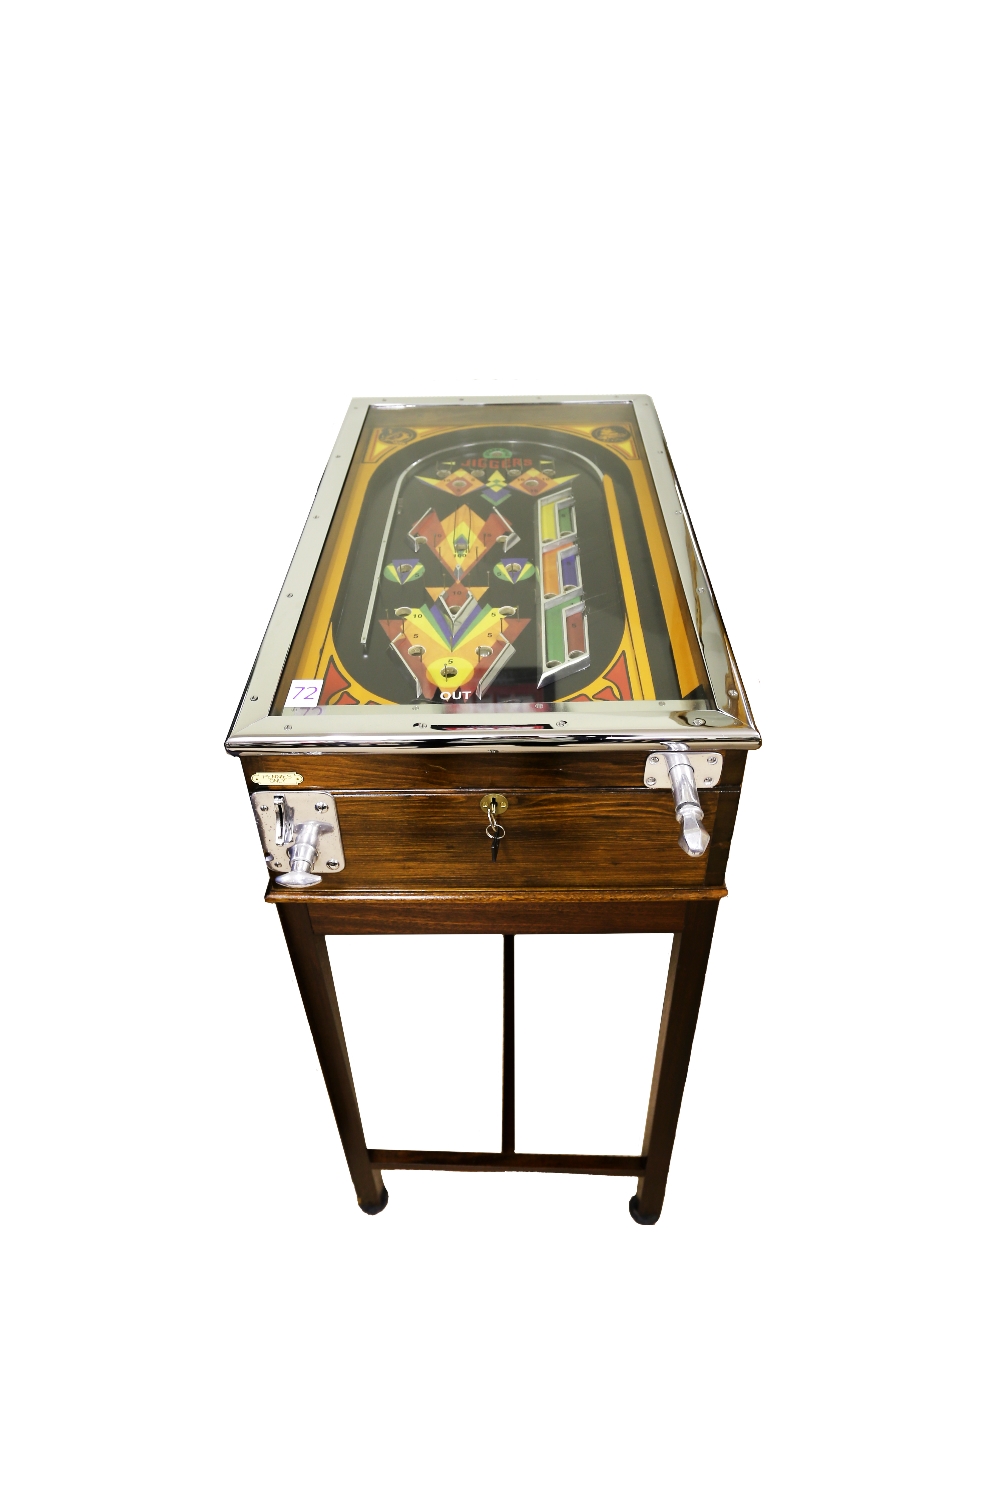 Genco Manufacturing Company Jiggers Pinball 1932. First released by Genco Manufacturing of Chicago